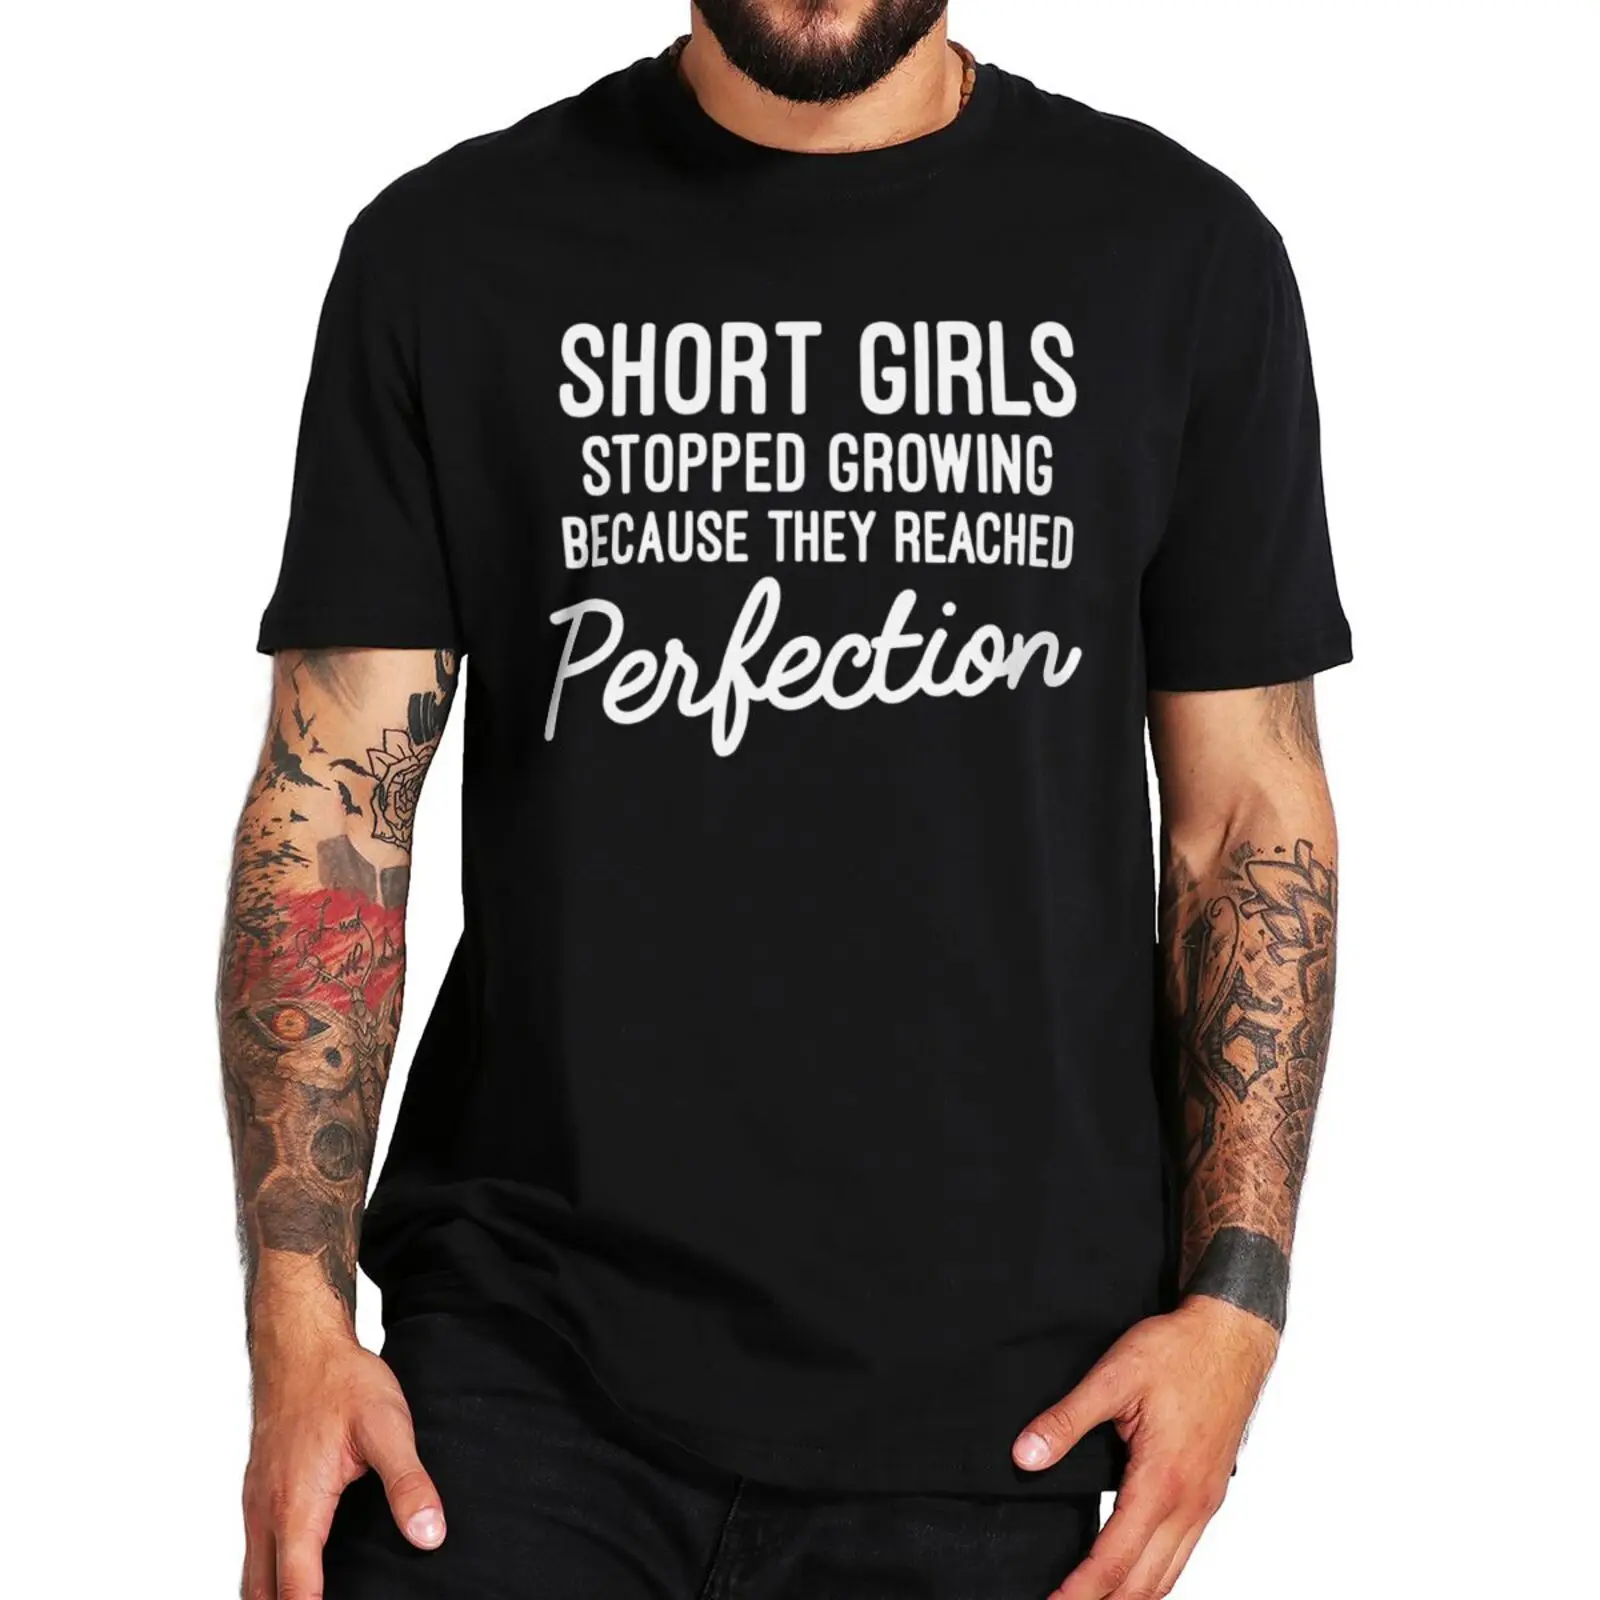 

Short Girls Stopped Growing Because They Reached Perfection T Shirt Funny Humor Sarcasm Quote Design Tshirt Girls Kids Gift